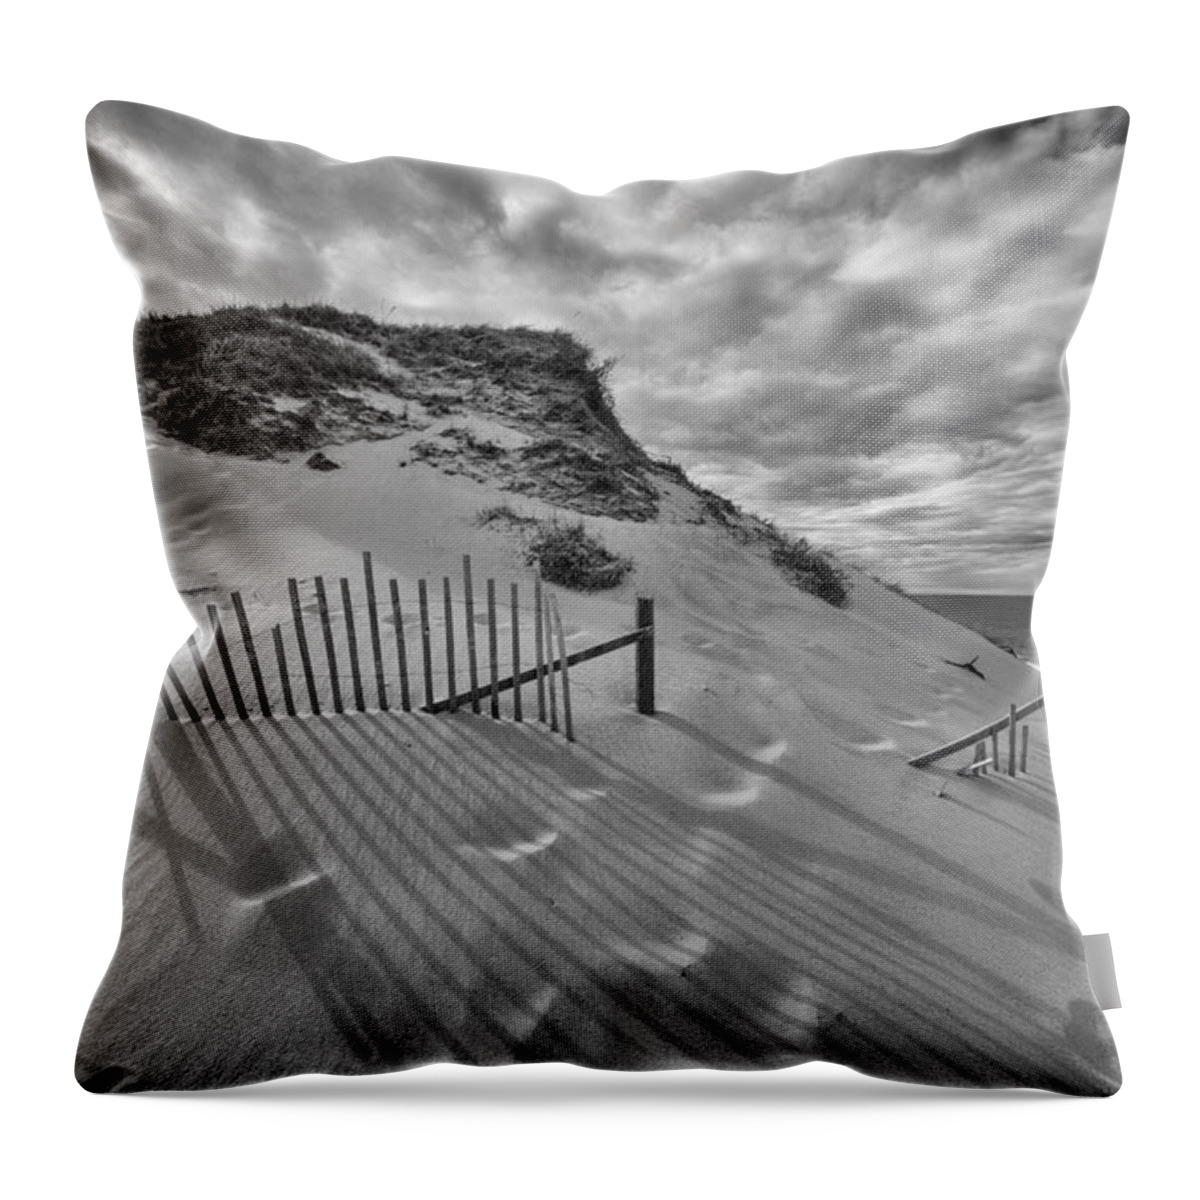 Kate Hannon Throw Pillow featuring the photograph Shifting Sands by Kate Hannon